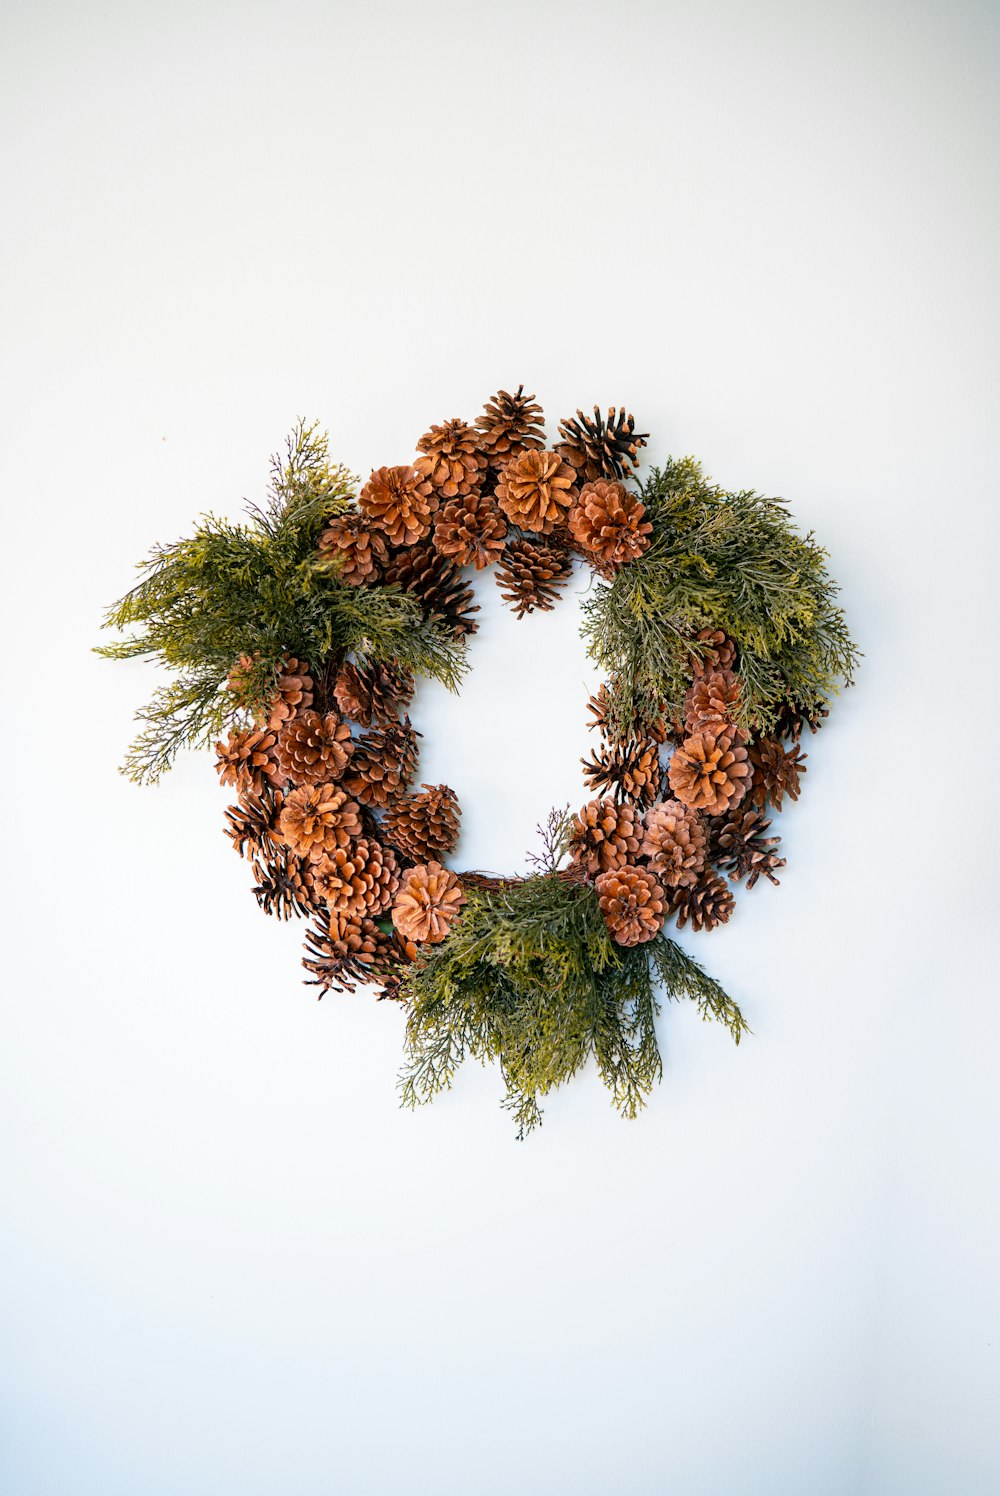 a wreath made of pine cones and evergreen branches